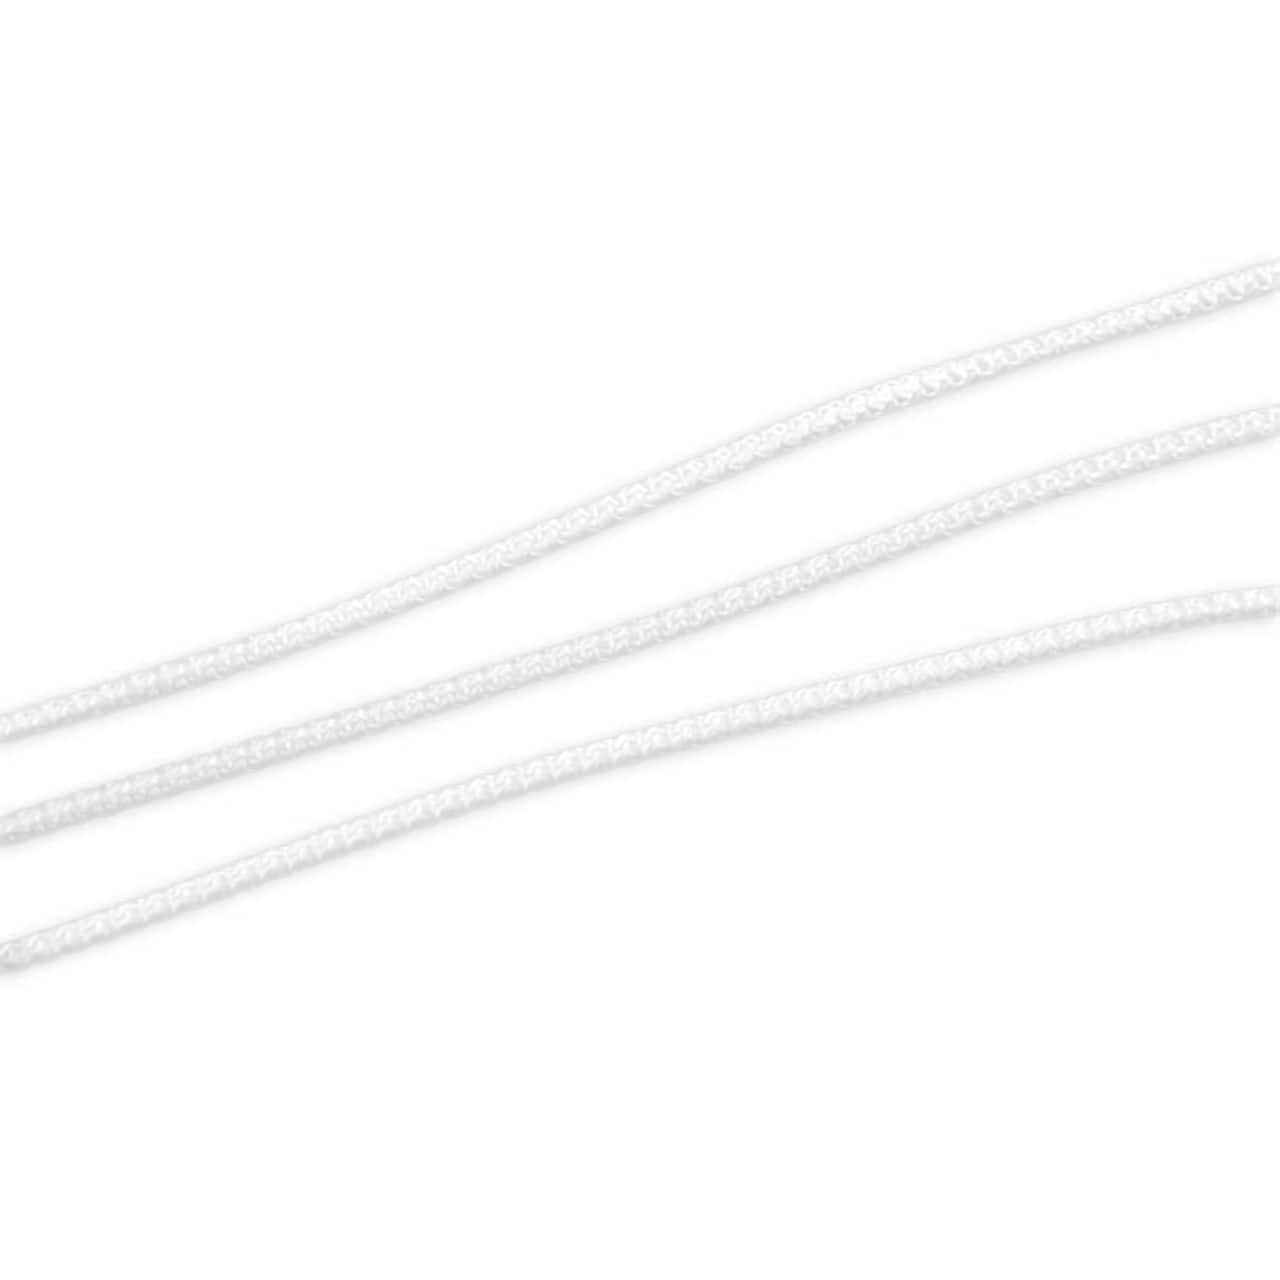 1.5 mm White Blind Cord - 200 Yards